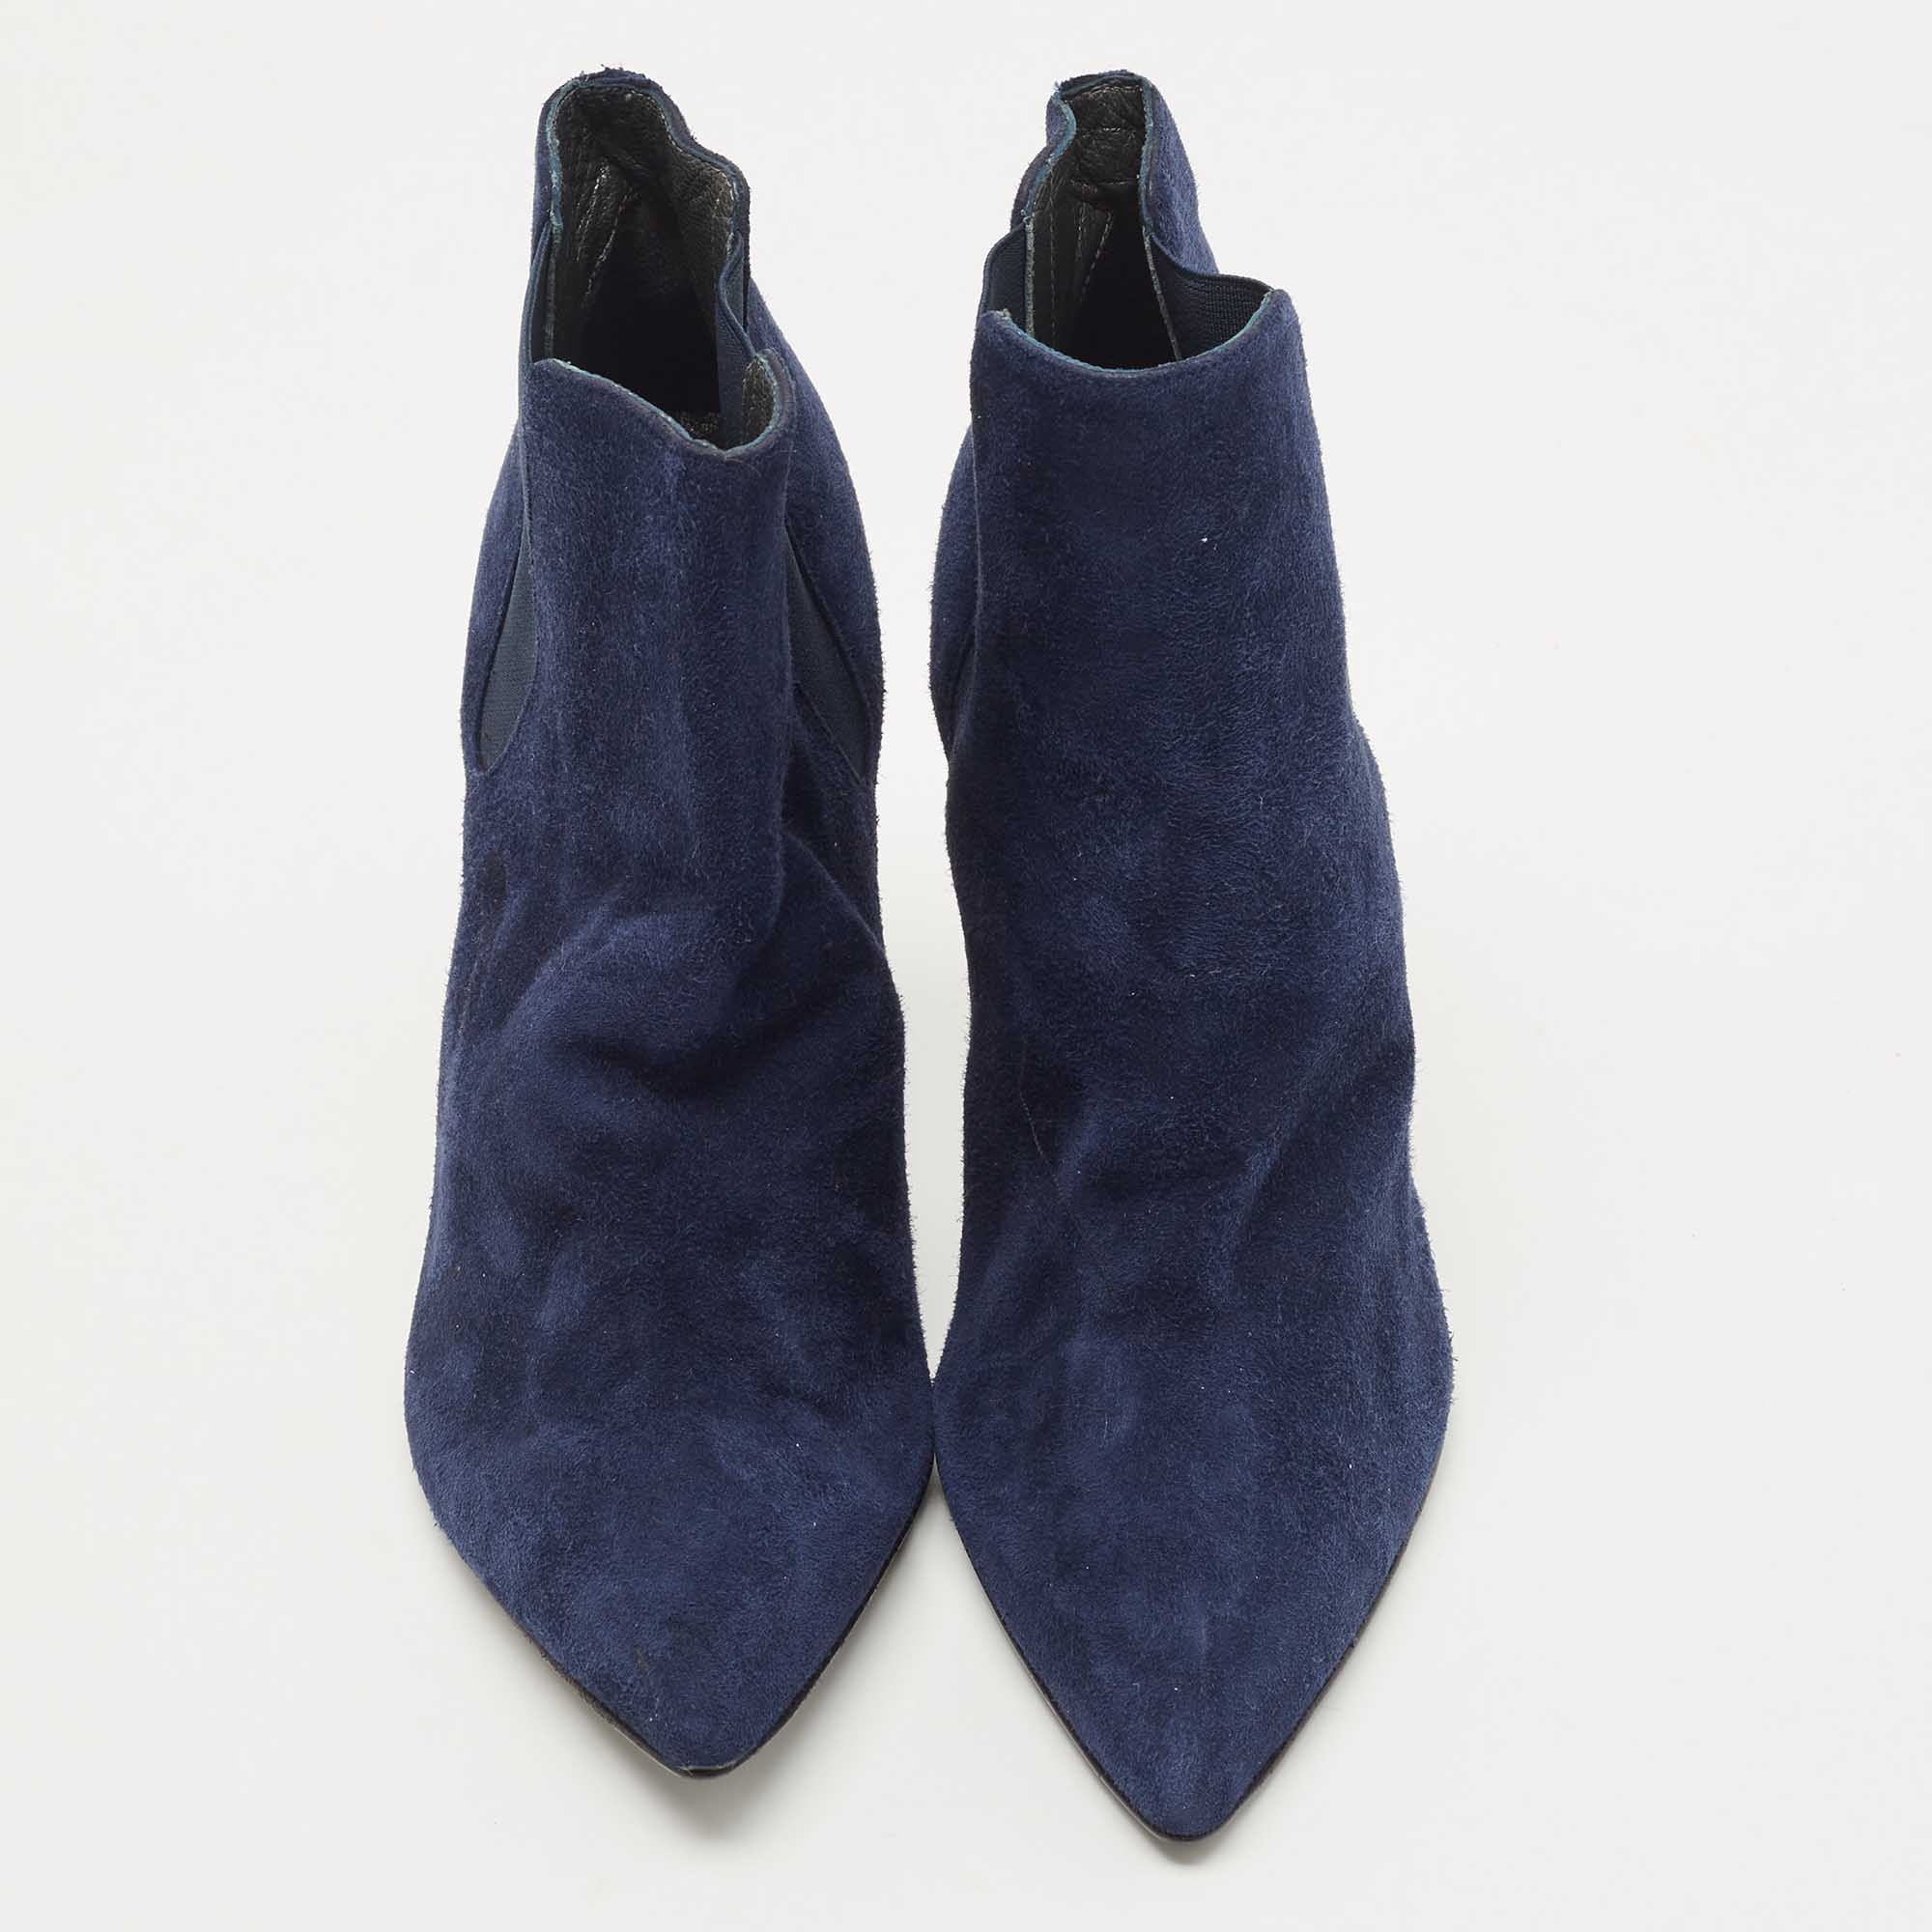 Stuart Weitzman Navy Blue Suede Pointed Toe Ankle Booties Size 40